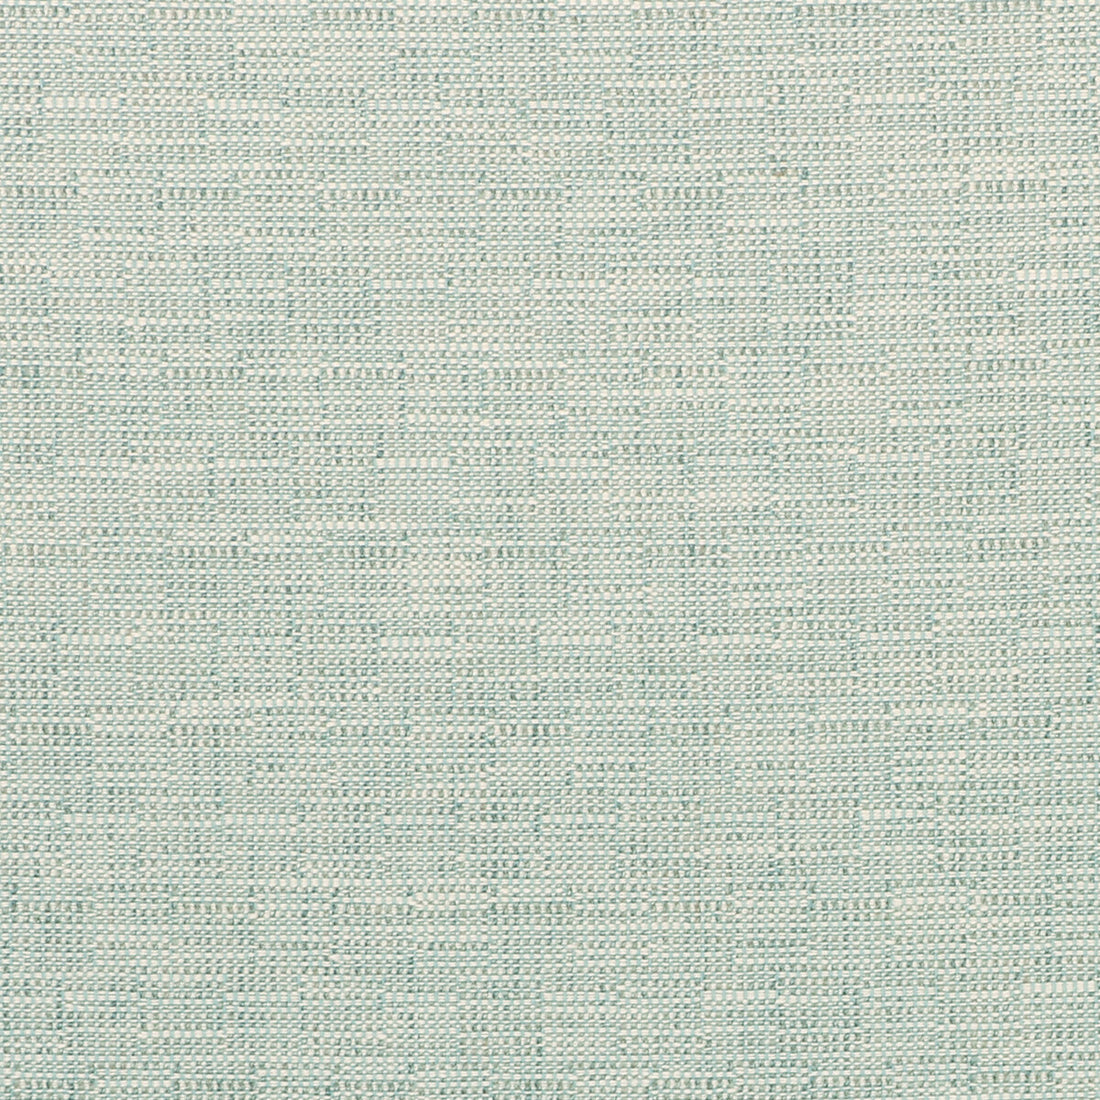 Kravet Smart fabric in 35518-135 color - pattern 35518.135.0 - by Kravet Smart in the Inside Out Performance Fabrics collection